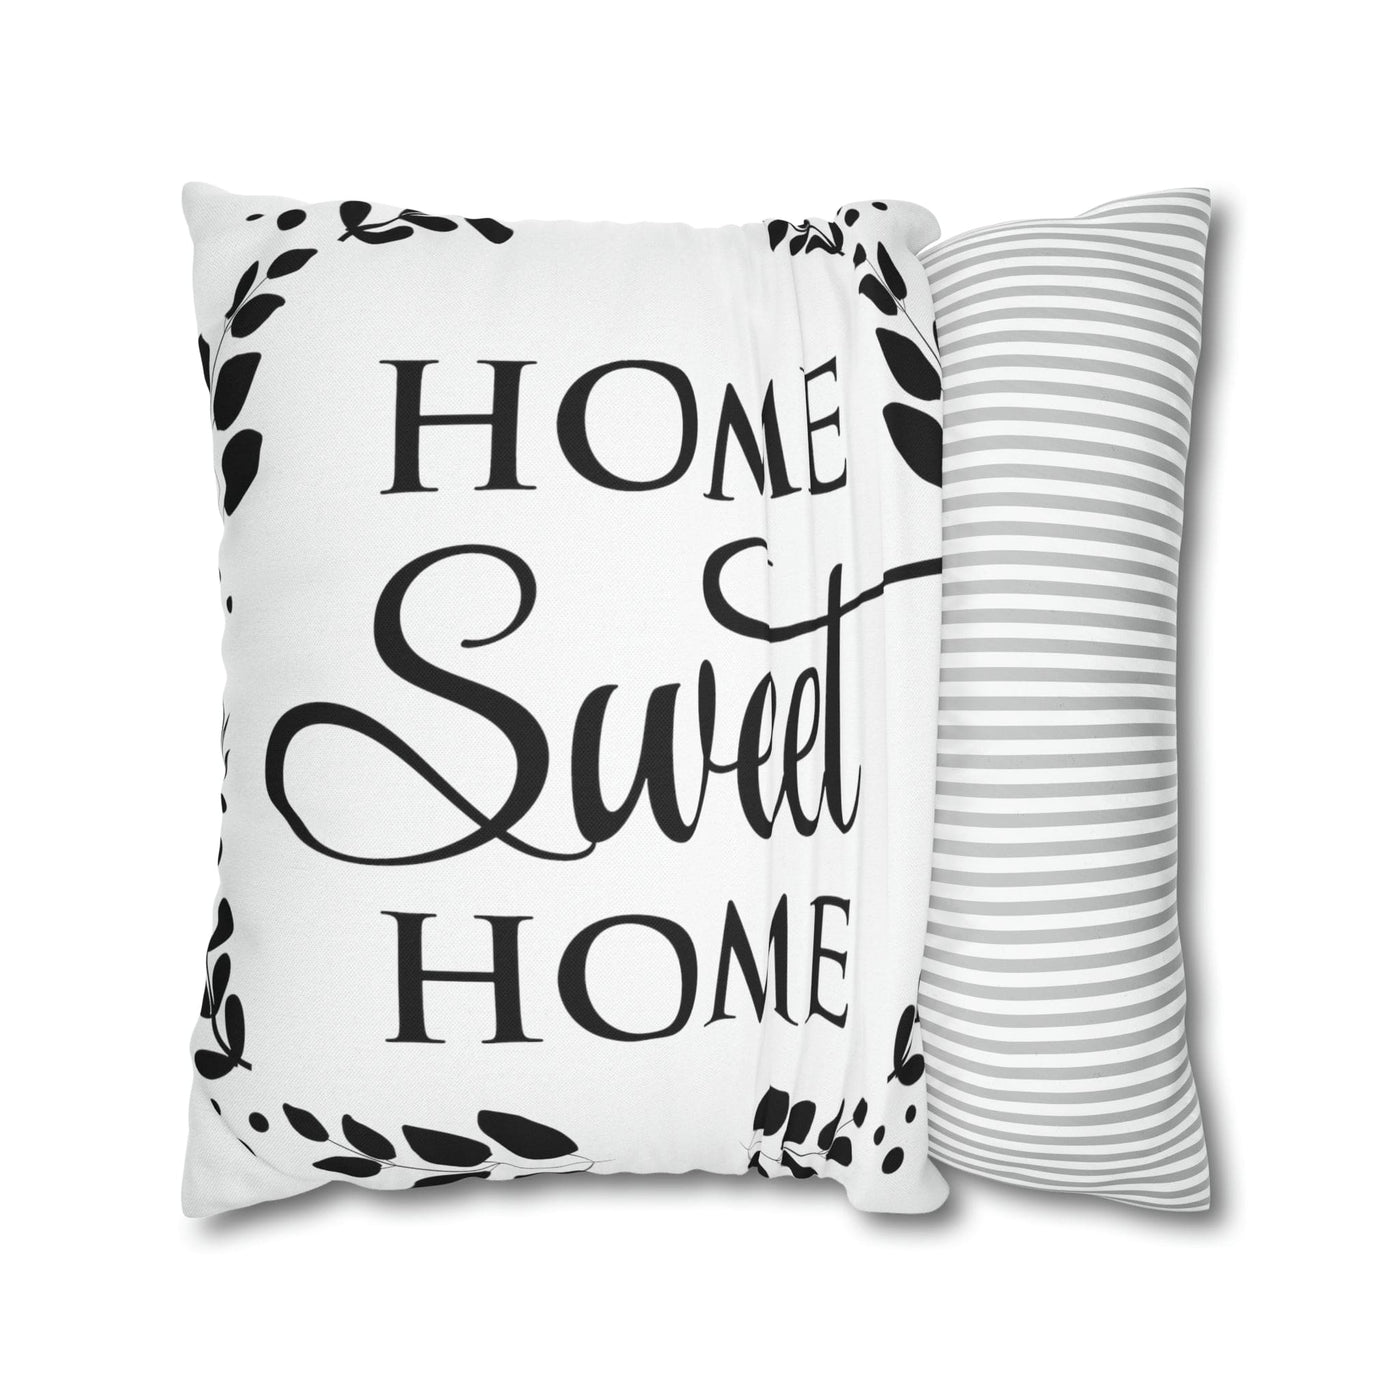 Decorative Throw Pillow Covers With Zipper - Set Of 2 Home Sweet Home Print